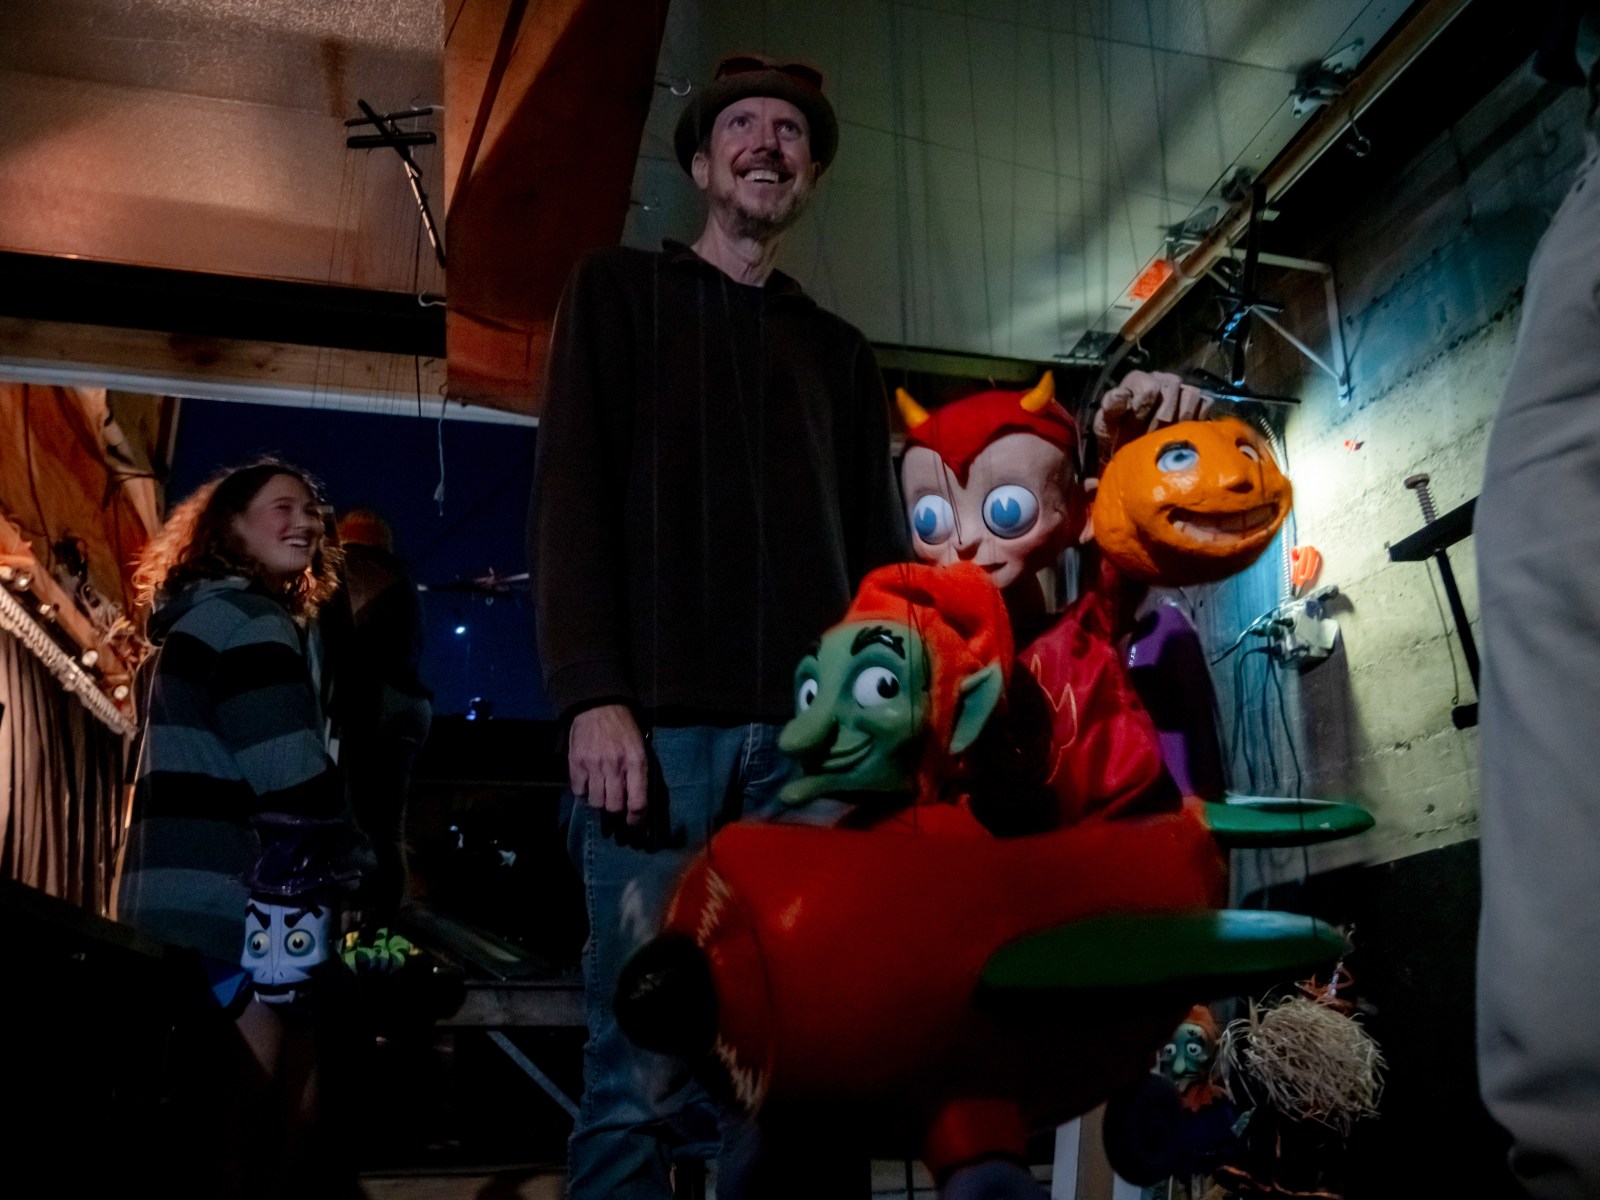 Driveway Follies marionette show is a Halloween tradition